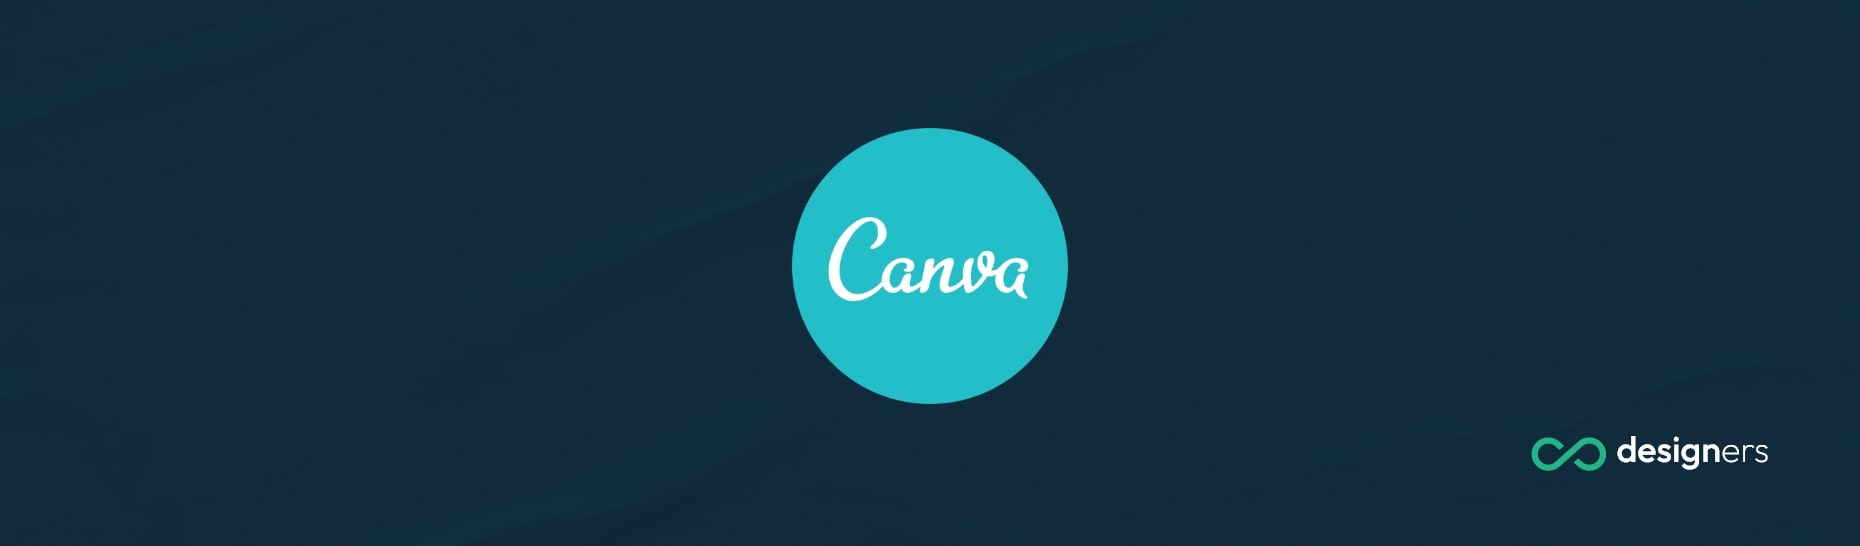 How Do You Make a Frame in Canva?